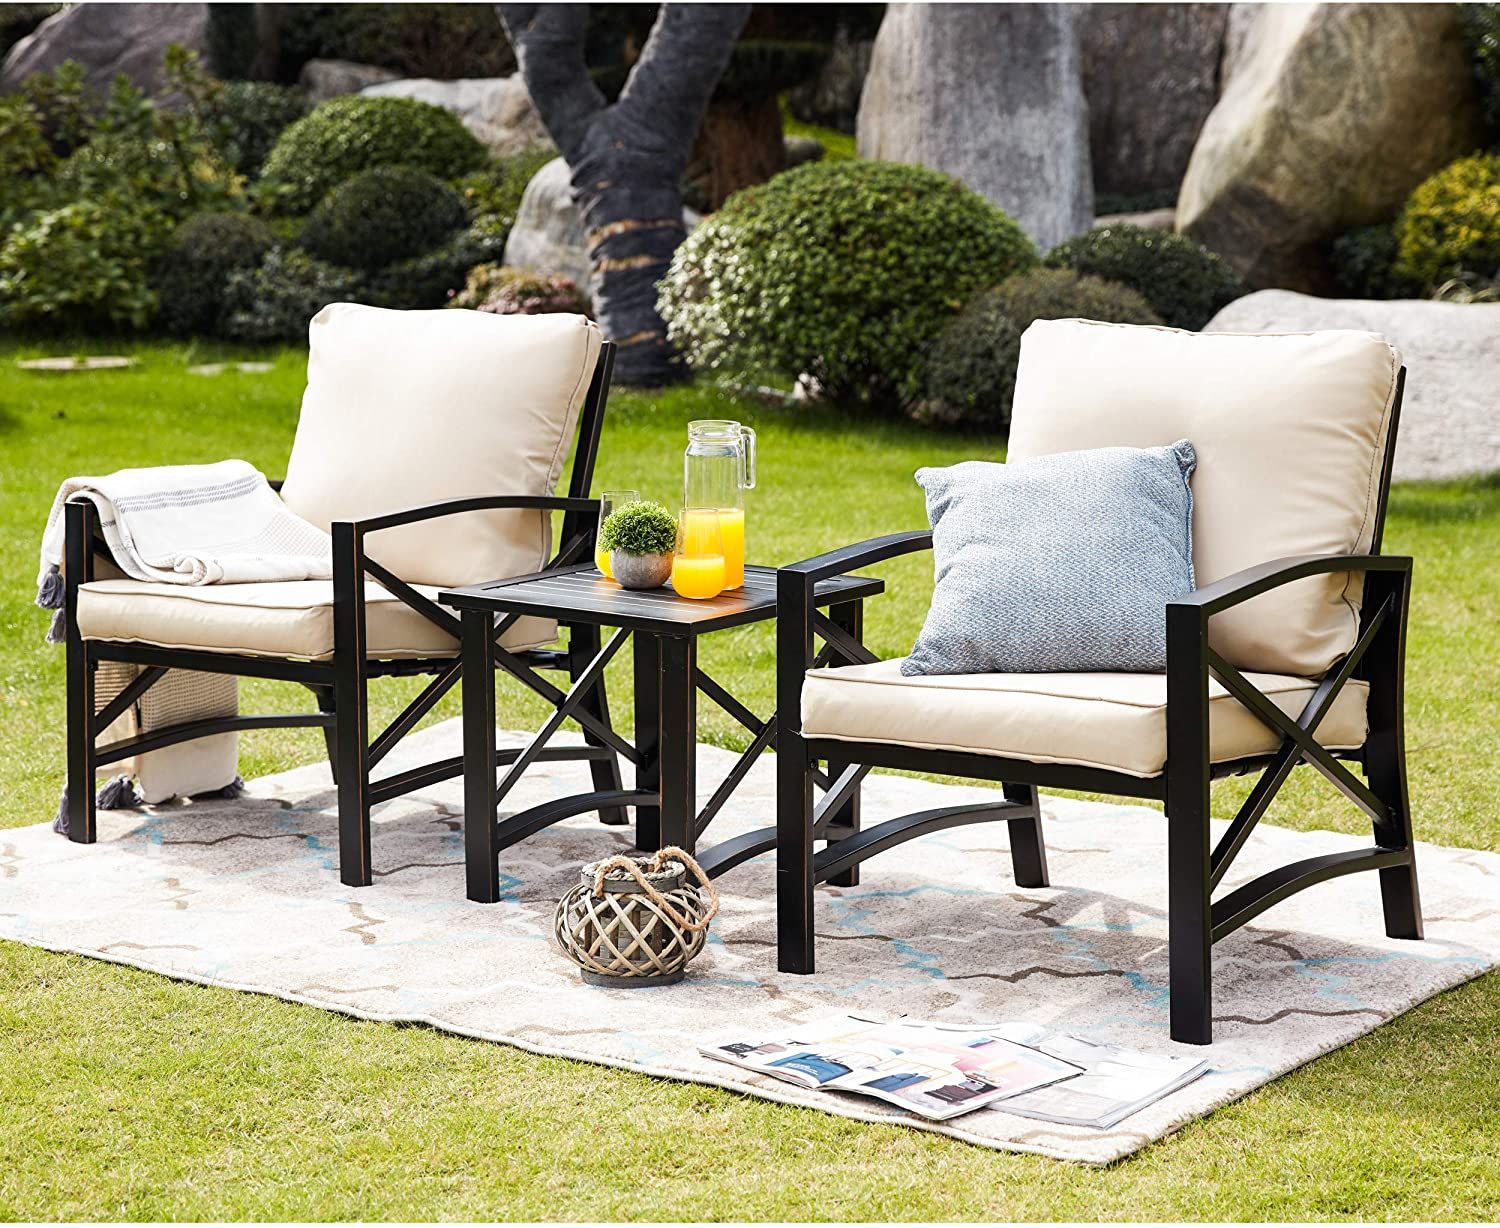 8 Best Patio Furniture Sets 2021 The, Better Homes And Gardens Patio Furniture Cushion Covers